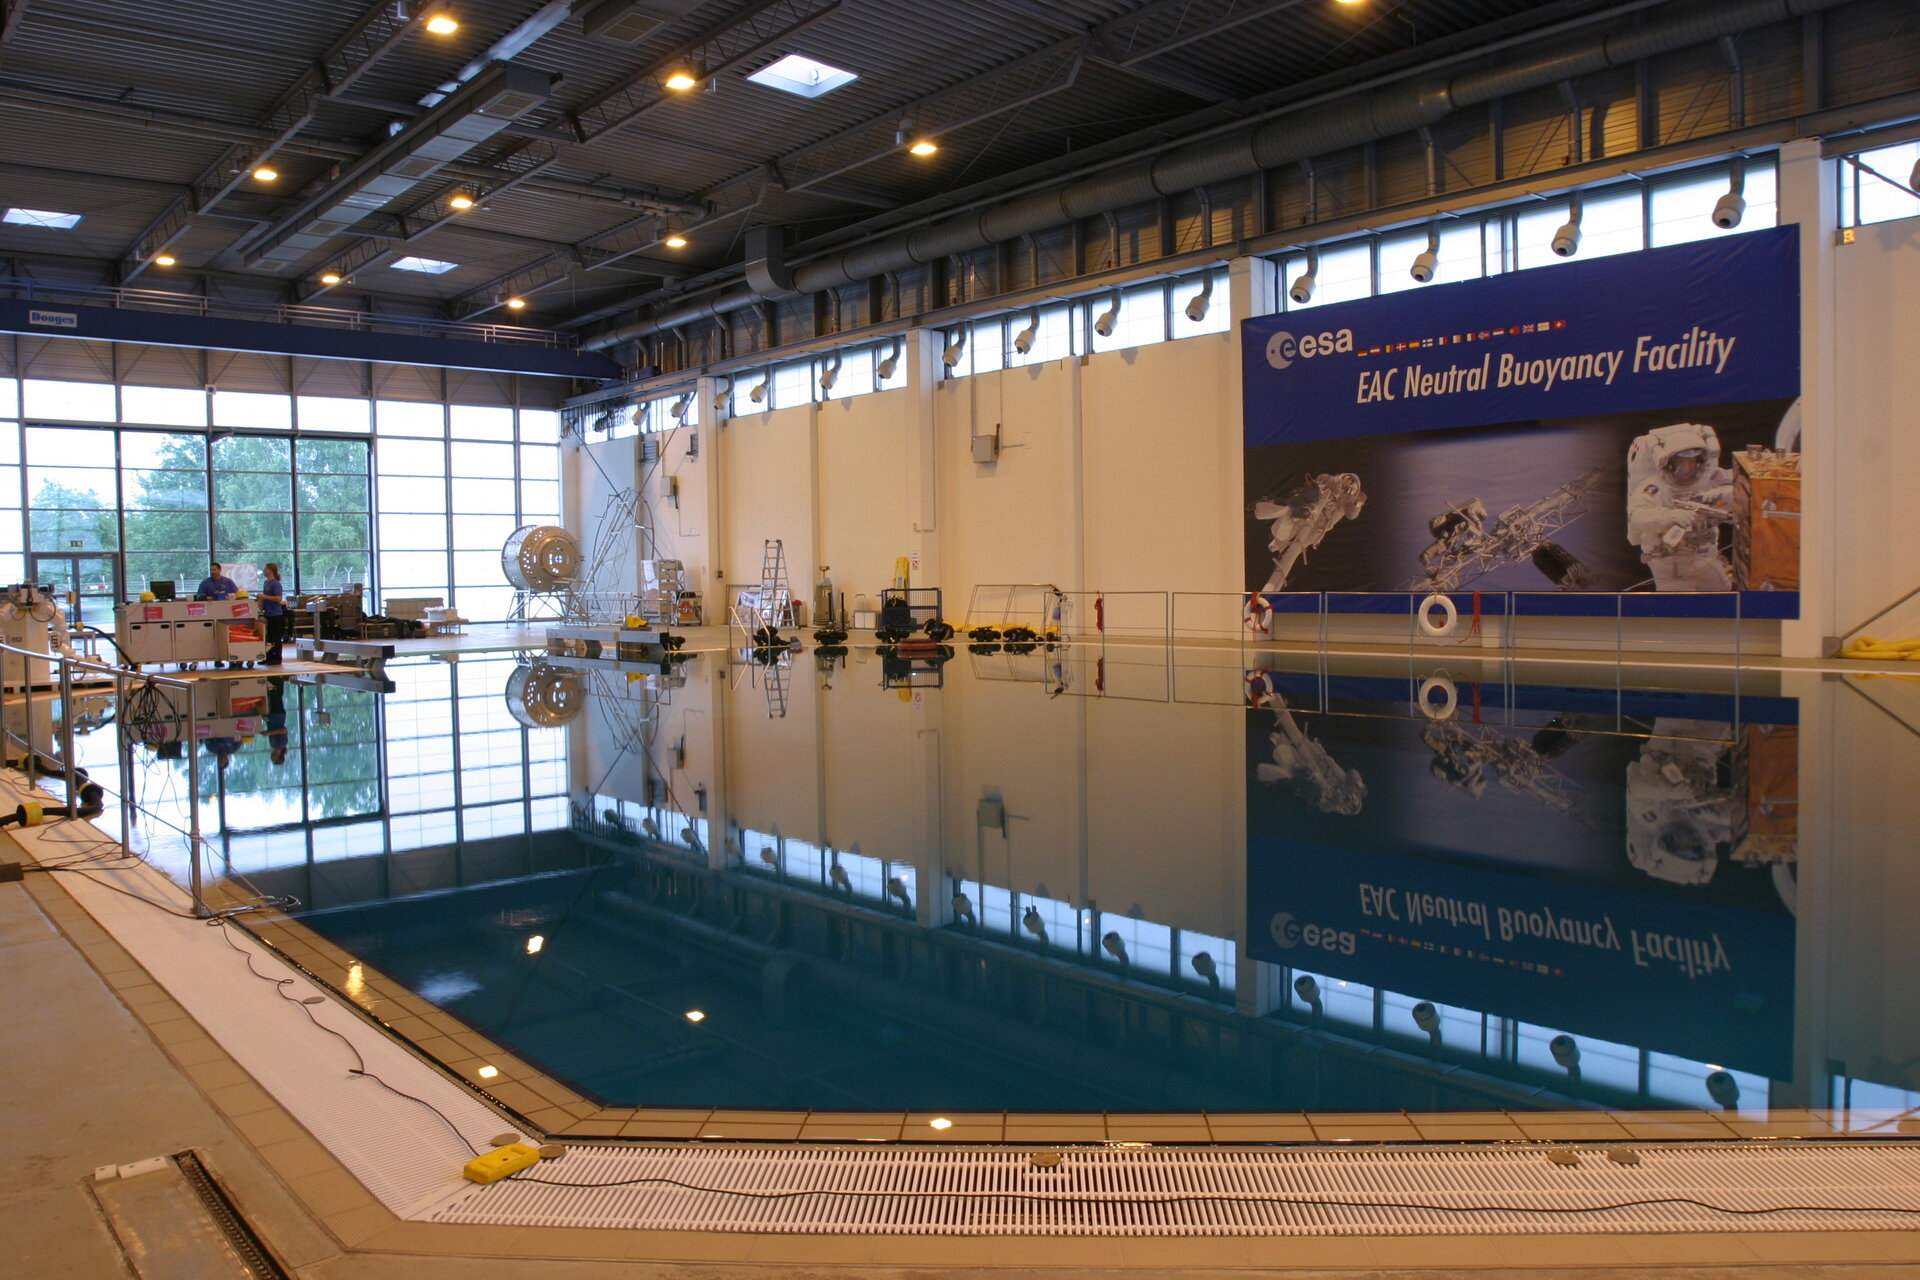 Neutral Buoyancy Facility at EAC in Cologne, Germany